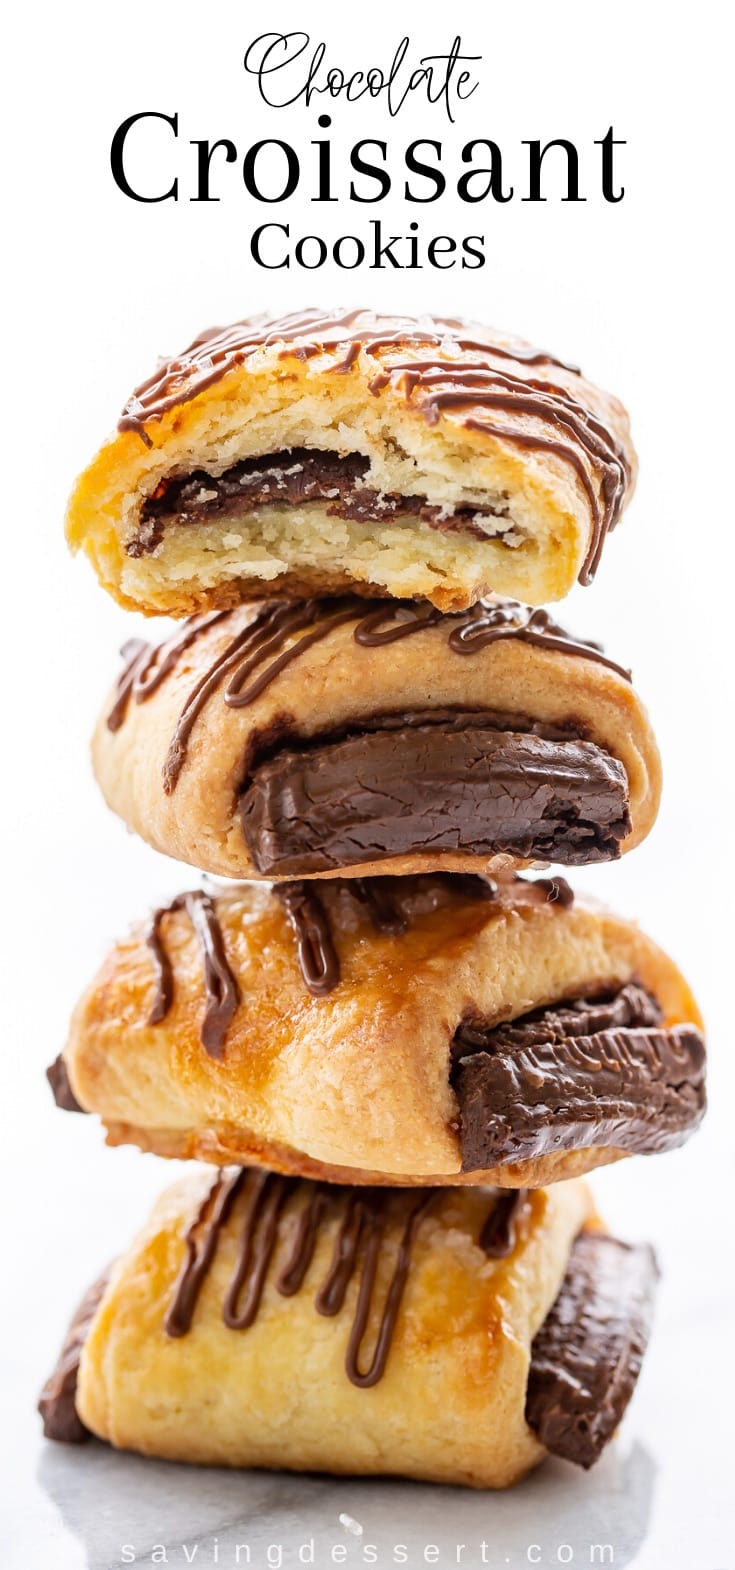 A stack of chocolate drizzled croissant cookies